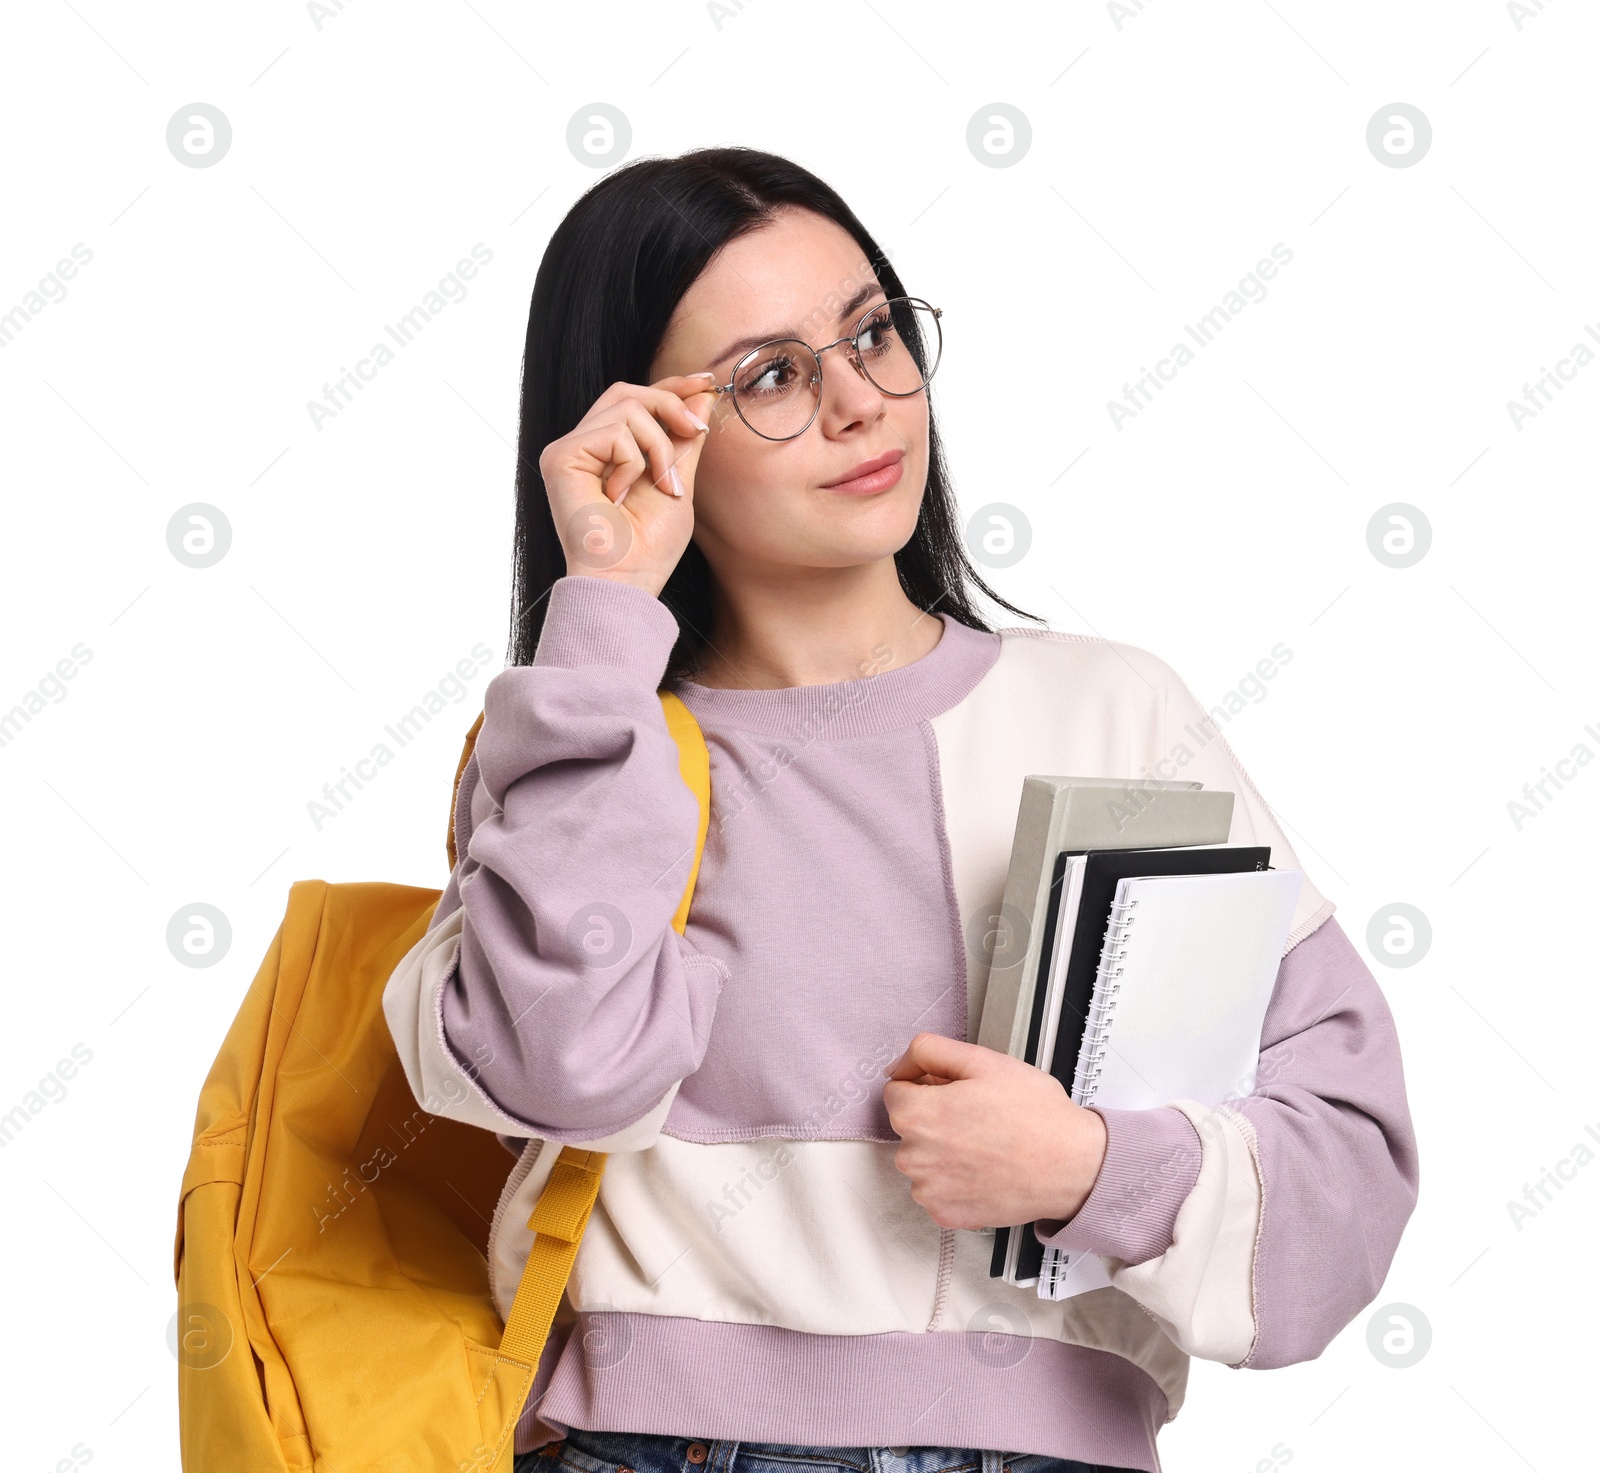 Photo of Student with notebooks and backpack on white background